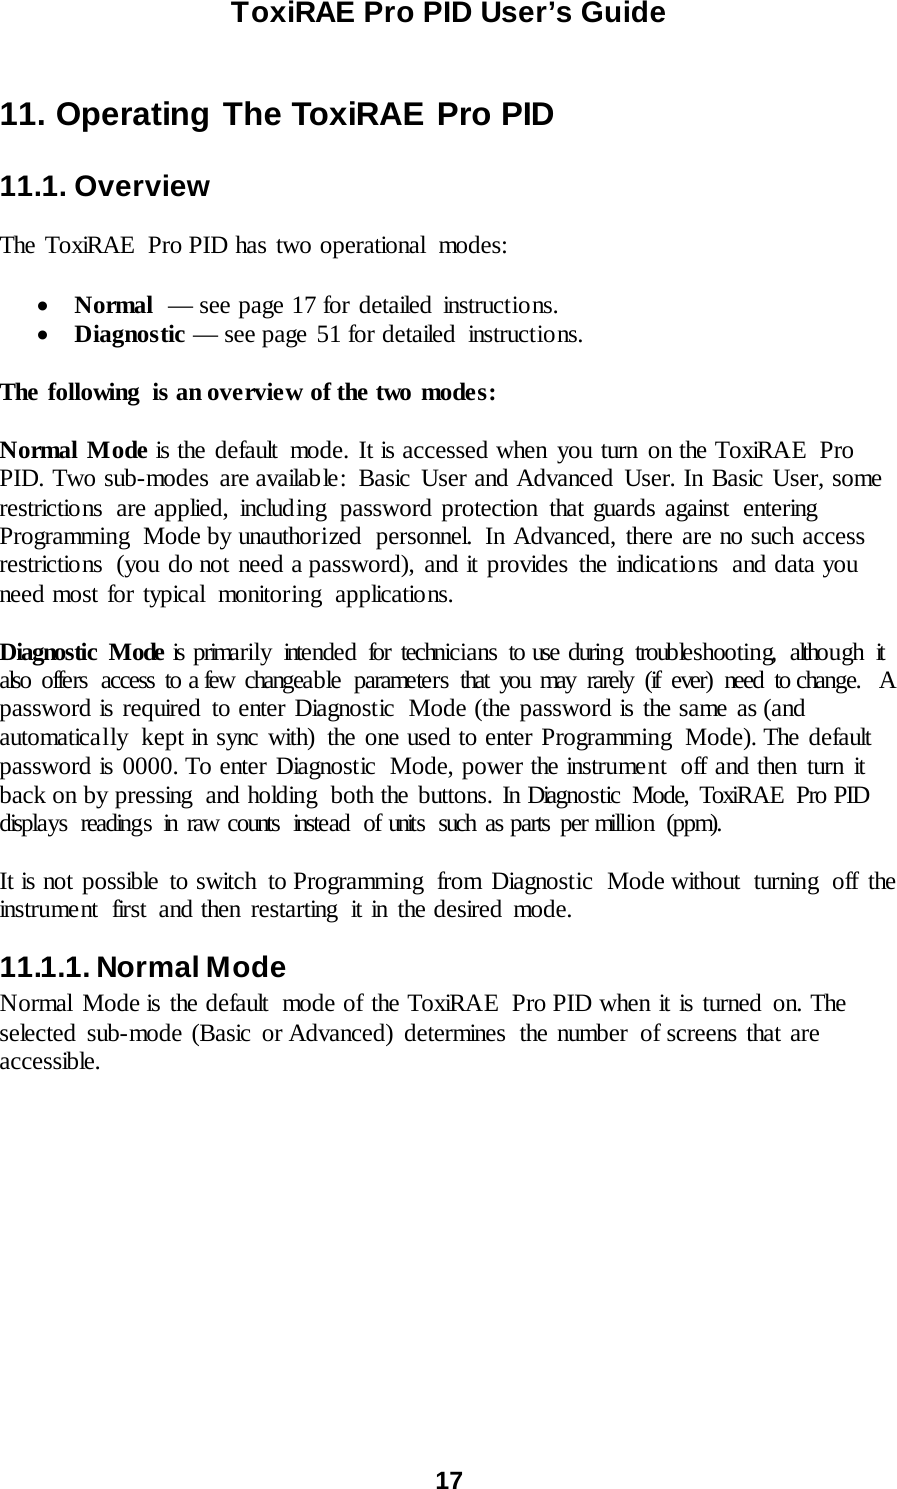 ToxiRAE Pro PID User’s Guide  17   11. Operating The ToxiRAE Pro PID  11.1. Overview  The ToxiRAE  Pro PID has two operational modes:  • Normal  — see page 17 for detailed instructions. • Diagnostic — see page 51 for detailed  instructions.  The following  is an overview of the two modes:   Normal Mode is the default  mode. It is accessed when you turn on the ToxiRAE Pro PID. Two sub-modes  are available:  Basic User and Advanced User. In Basic User, some restrictions  are applied, including  password protection that guards against  entering Programming Mode by unauthorized  personnel. In Advanced, there are no such access restrictions  (you do not need a password), and it provides the indications  and data you need most for typical monitoring applicatio ns.  Diagnostic Mode is prima rily  intended for technicians  to use during troubleshooting, although it also offers access to a few changeable parameters that you may rarely (if ever) need to change.   A password is required to enter Diagnostic  Mode (the password is the same as (and automatically  kept in sync with) the one used to enter Programming  Mode). The default password is 0000. To enter Diagnostic  Mode, power the instrument  off and then turn it back on by pressing  and holding  both the buttons. In Diagnostic Mode, ToxiRAE  Pro PID displays readings in raw counts instead of units such as parts per million (ppm).  It is not possible to switch  to Programming  from Diagnostic  Mode without turning off the instrument first and then restarting it in the desired mode. 11.1.1. Normal Mode Normal Mode is the default  mode of the ToxiRAE  Pro PID when it is turned on. The selected sub-mode (Basic  or Advanced) determines  the number of screens that are accessible.  